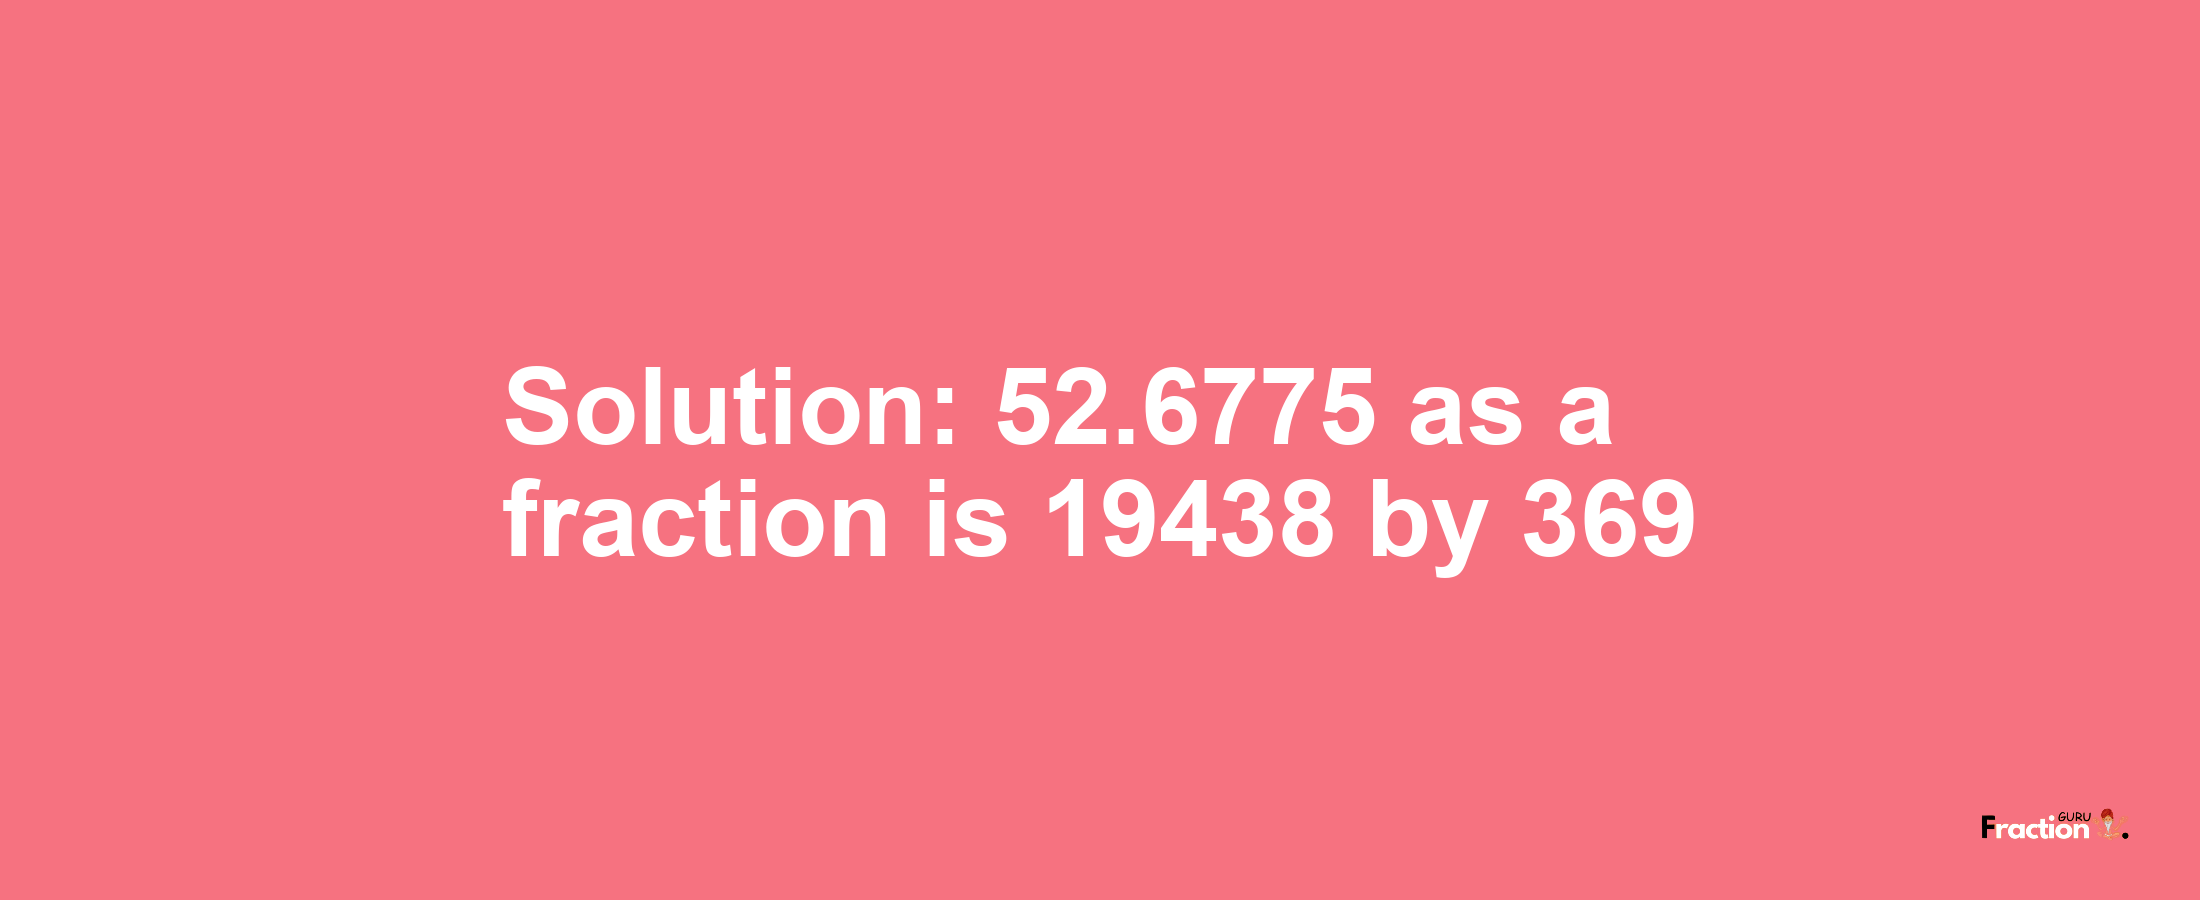 Solution:52.6775 as a fraction is 19438/369